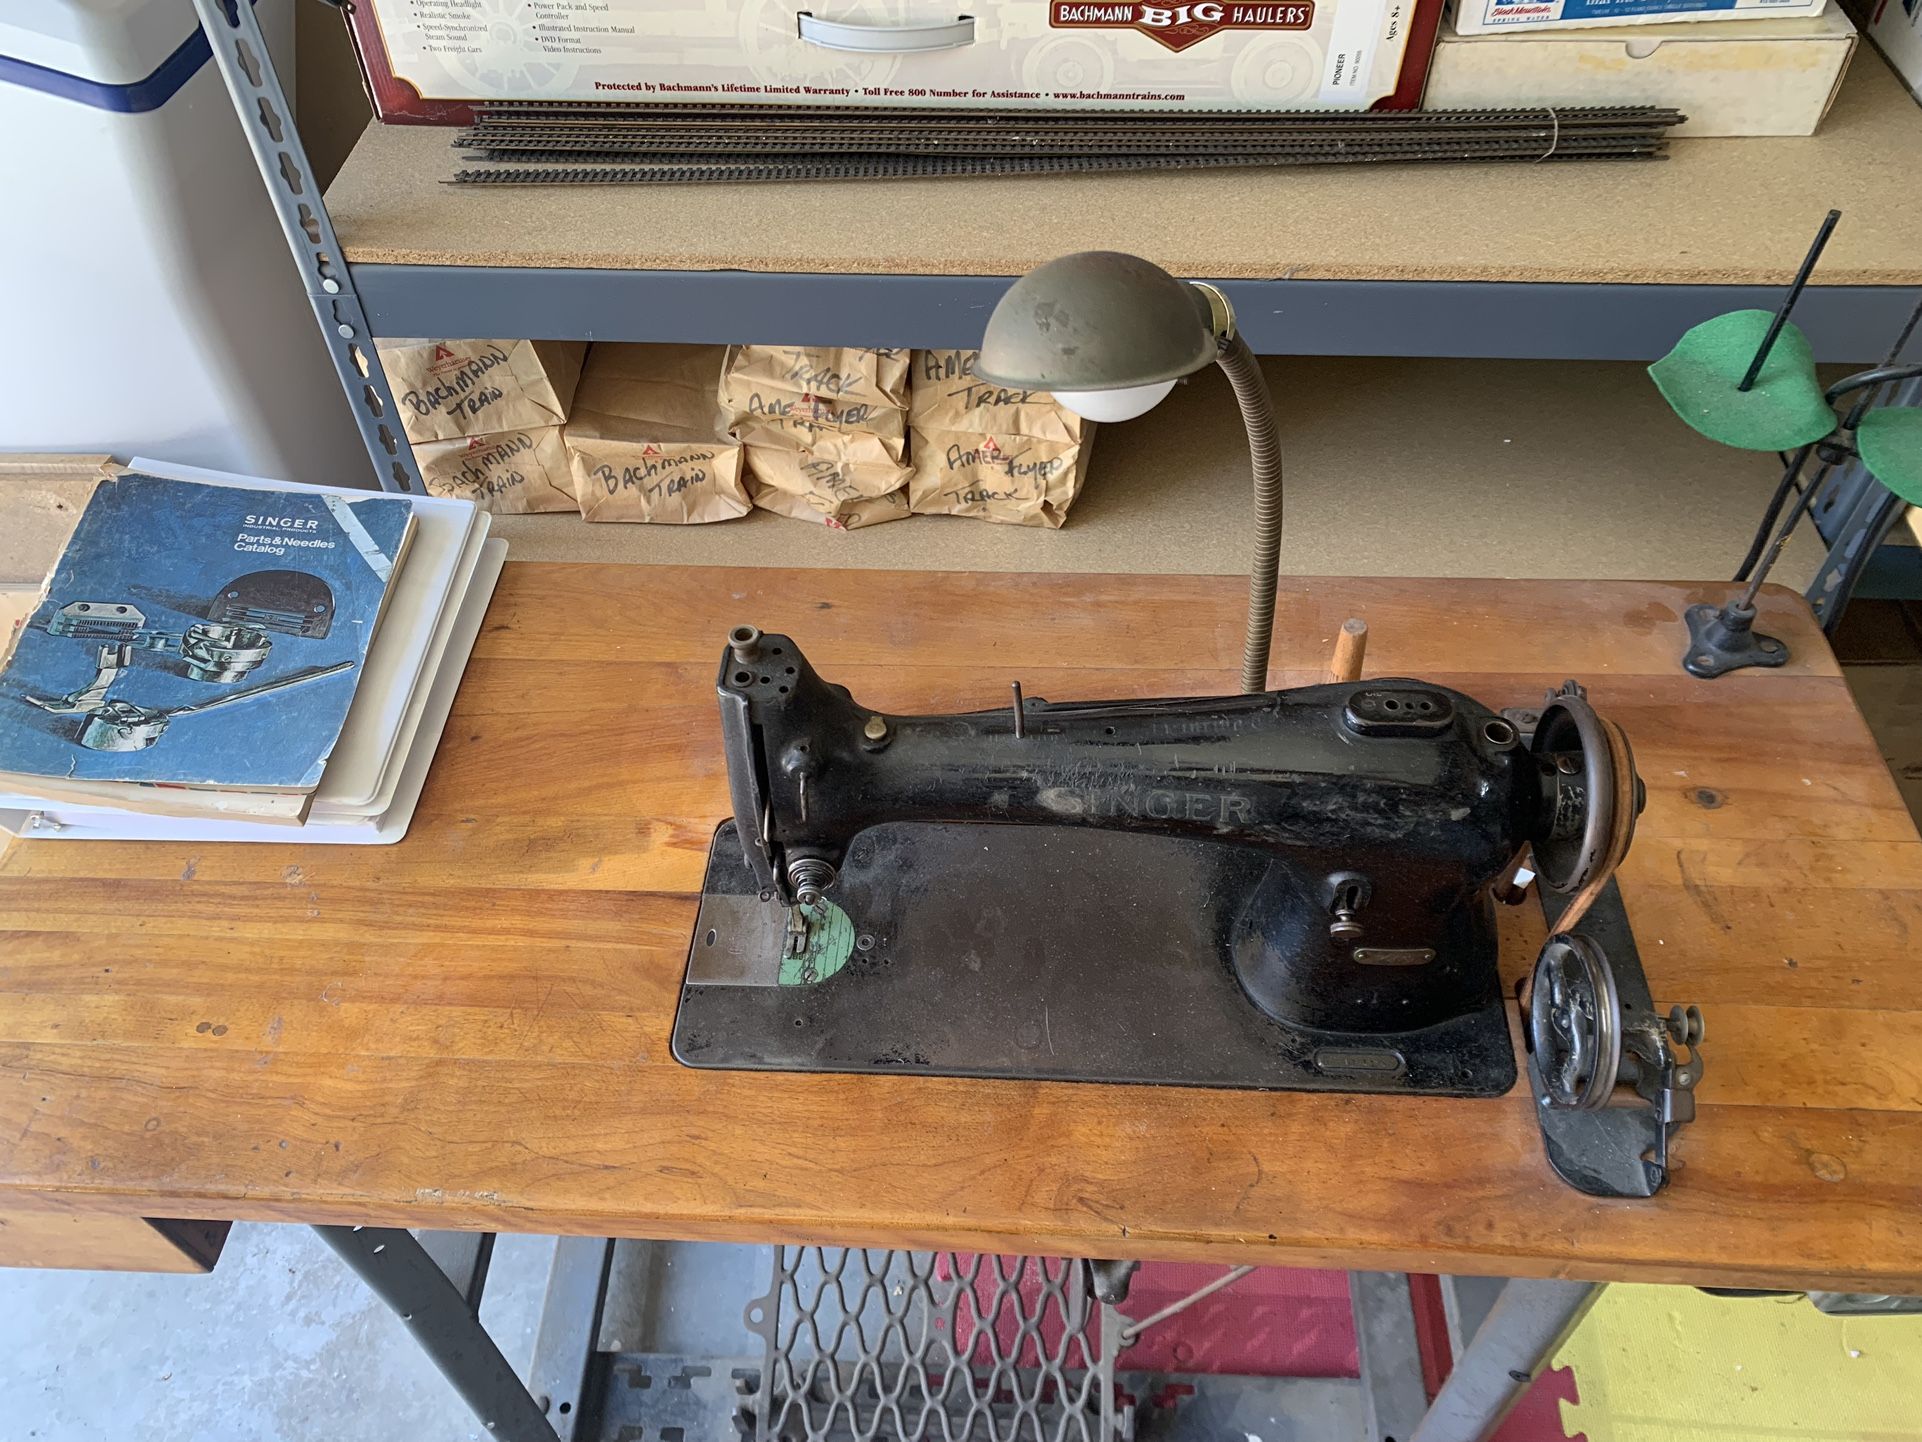 Brother Pe800 Embroidery Machine for Sale in Tracy, CA - OfferUp